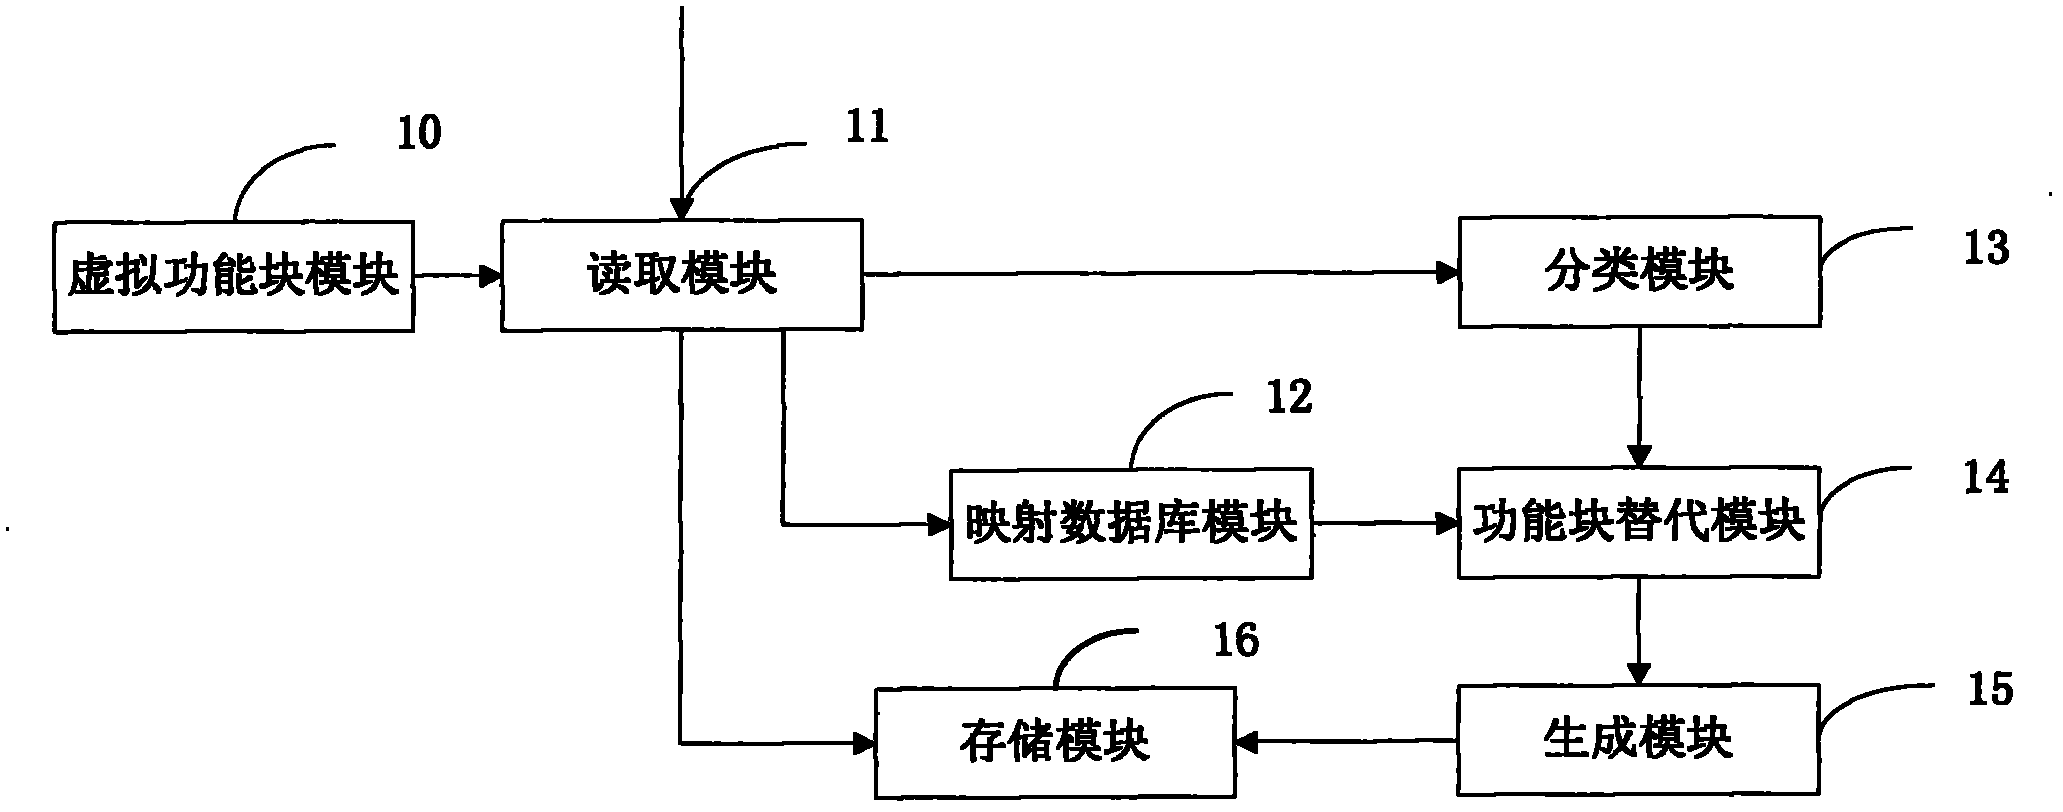 Method and device for nuclear power station to generate virtual digital control system configuration file